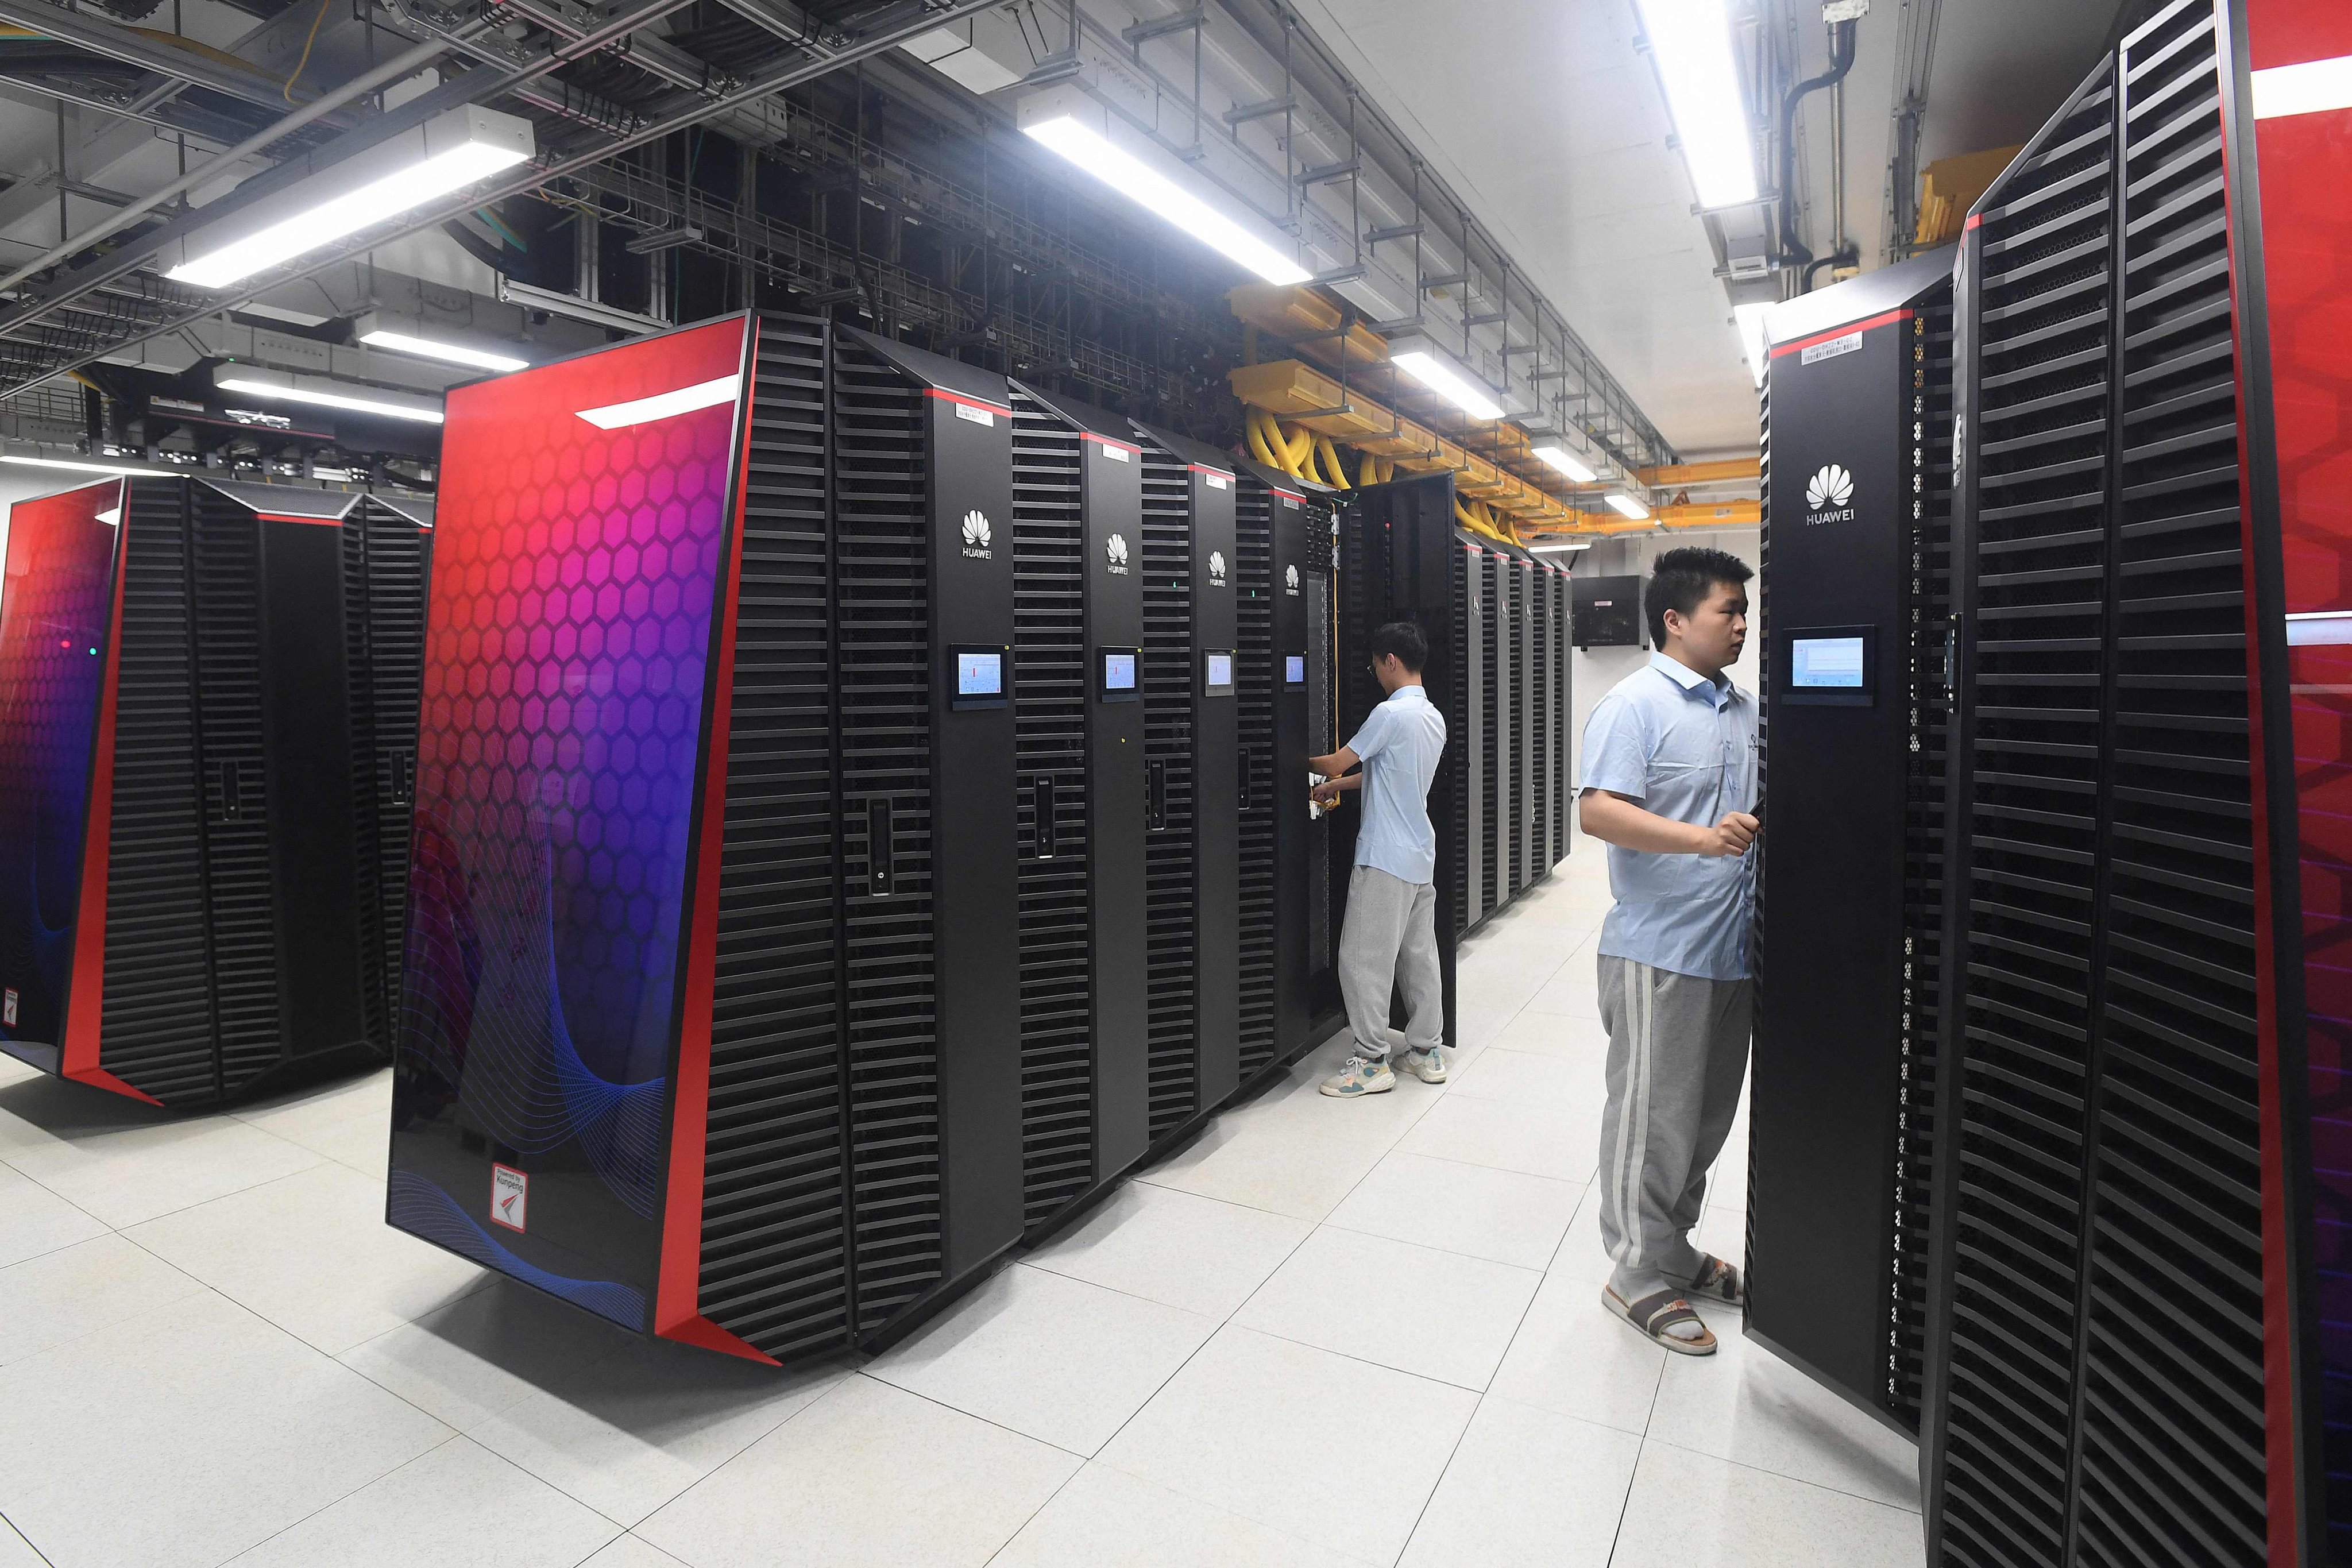 China’s National Data Administration chief says the country’s computing power needs to be integrated to drive innovation. Photo: AFP